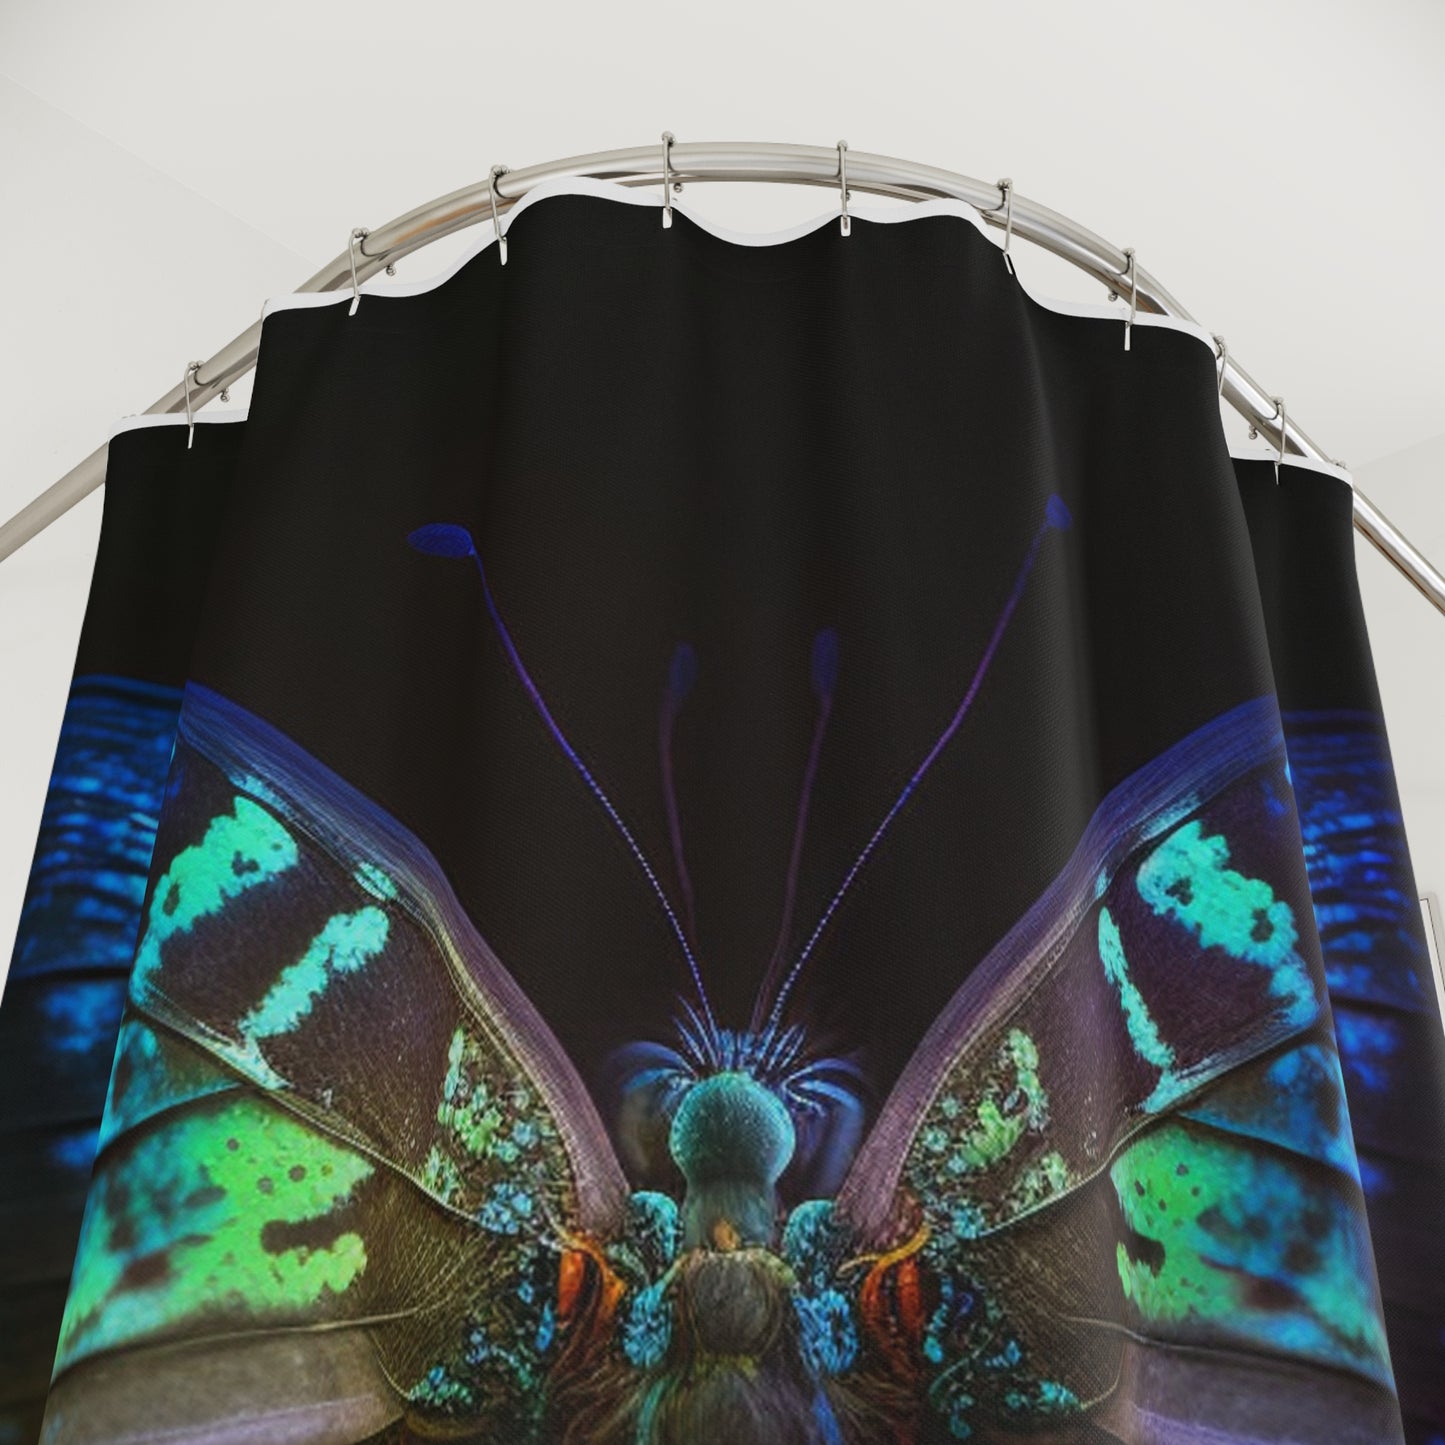 Polyester Shower Curtain Neon Hue Butterfly 3